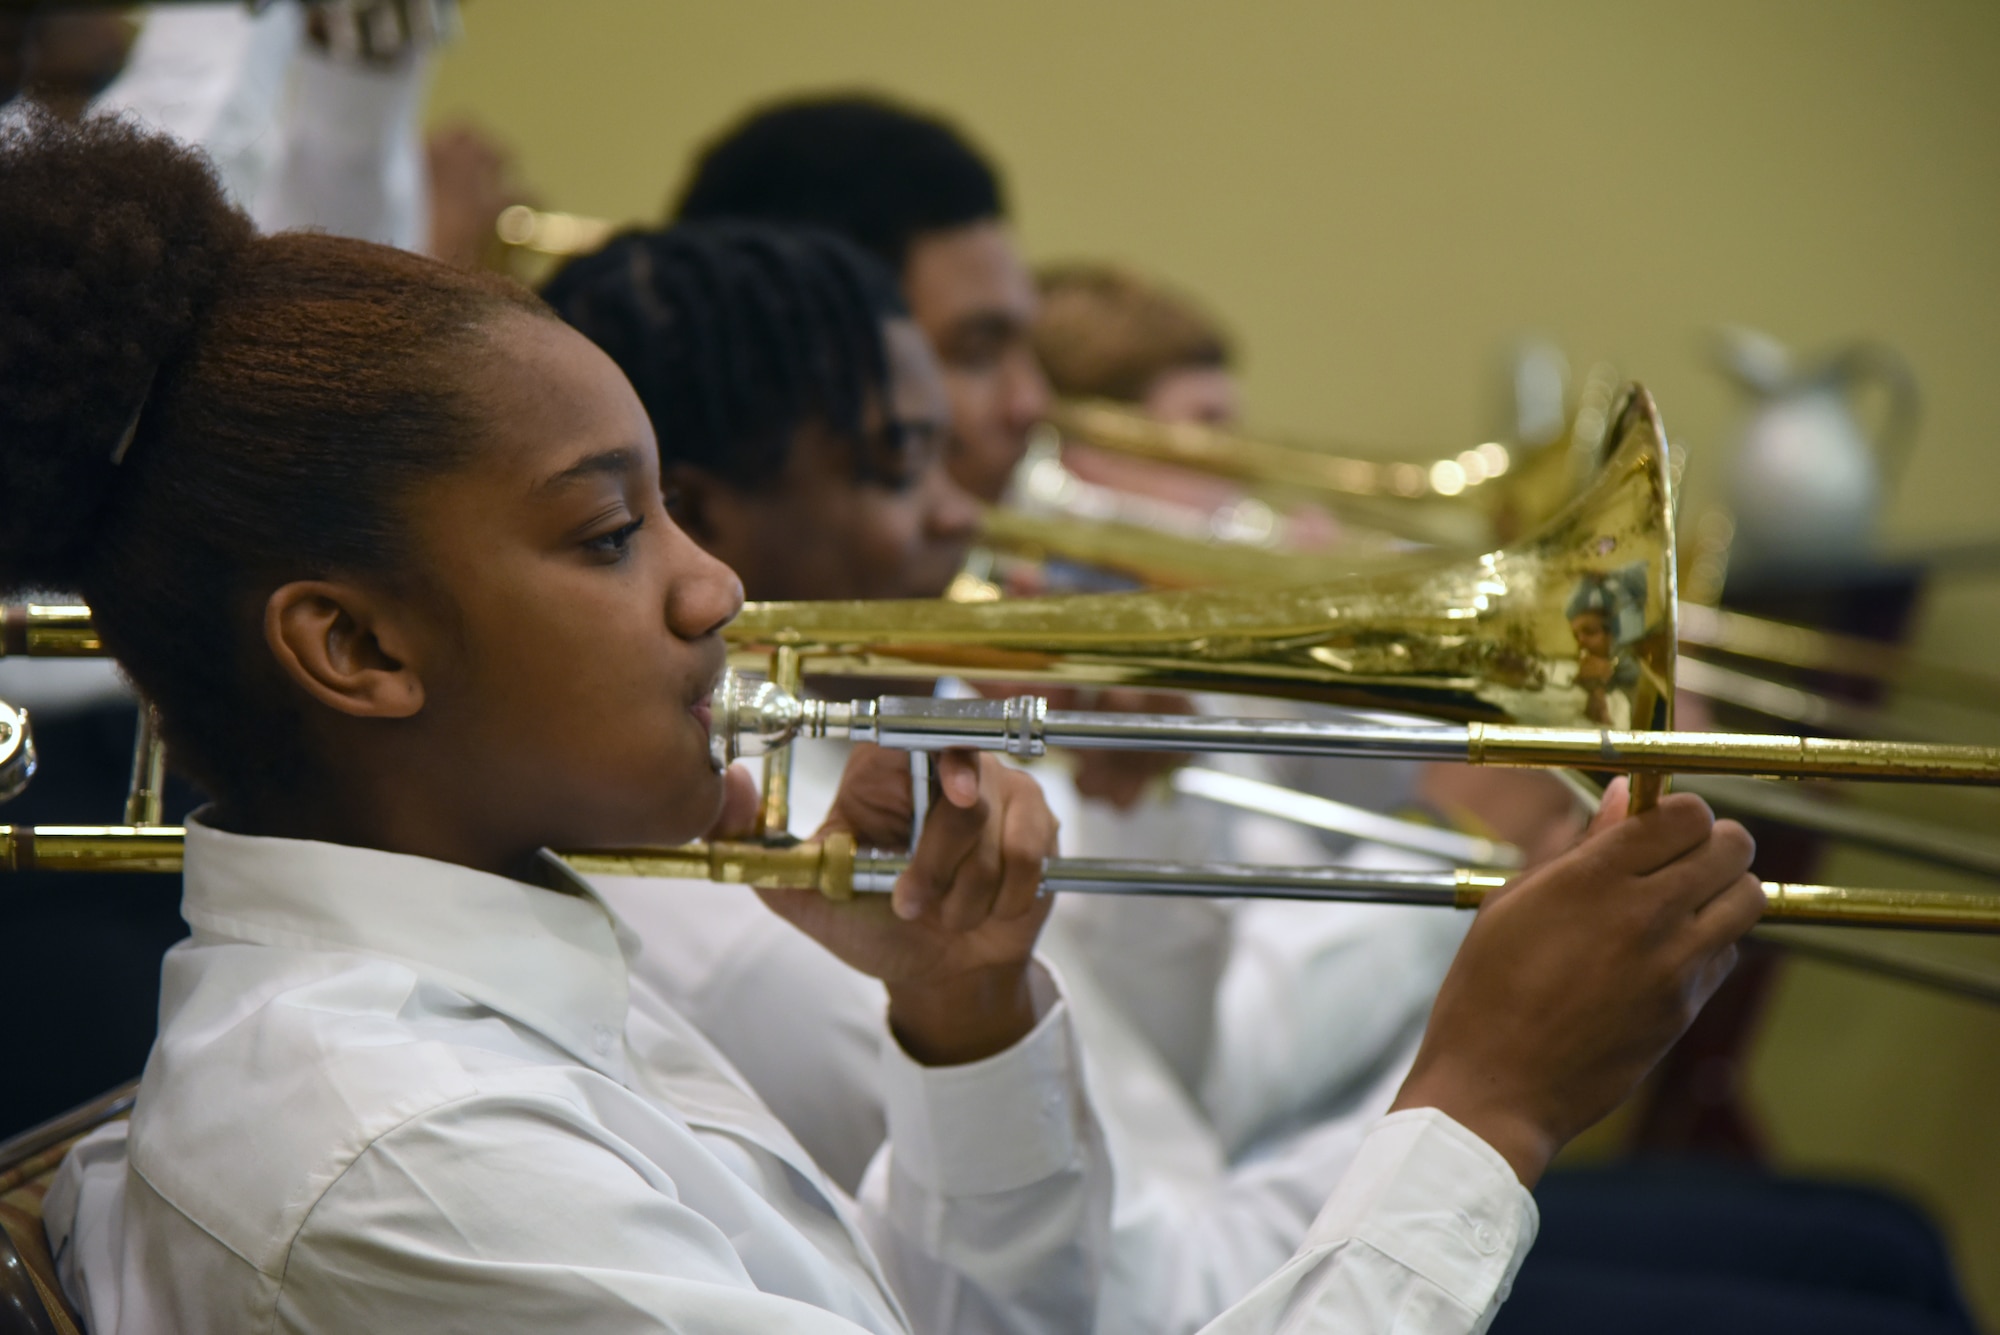 Triniti Cooper, Moss Point High School Jazz Ensemble member, plays the trombone during the African-American Heritage Committee Luncheon at the Bay Breeze Event Center Feb. 20, 2018, on Keesler Air Force Base, Mississippi. The theme of African American History Month this year is “African Americans in Times of War.” Proceeds from the event will benefit the Col. Lawrence E. Roberts memorial scholarship fund which helps local youth pay for tuition, books and other academic costs. Roberts, a Biloxi resident and Tuskegee Airman, passed away in 2004. (U.S. Air Force photo by Kemberly Groue)